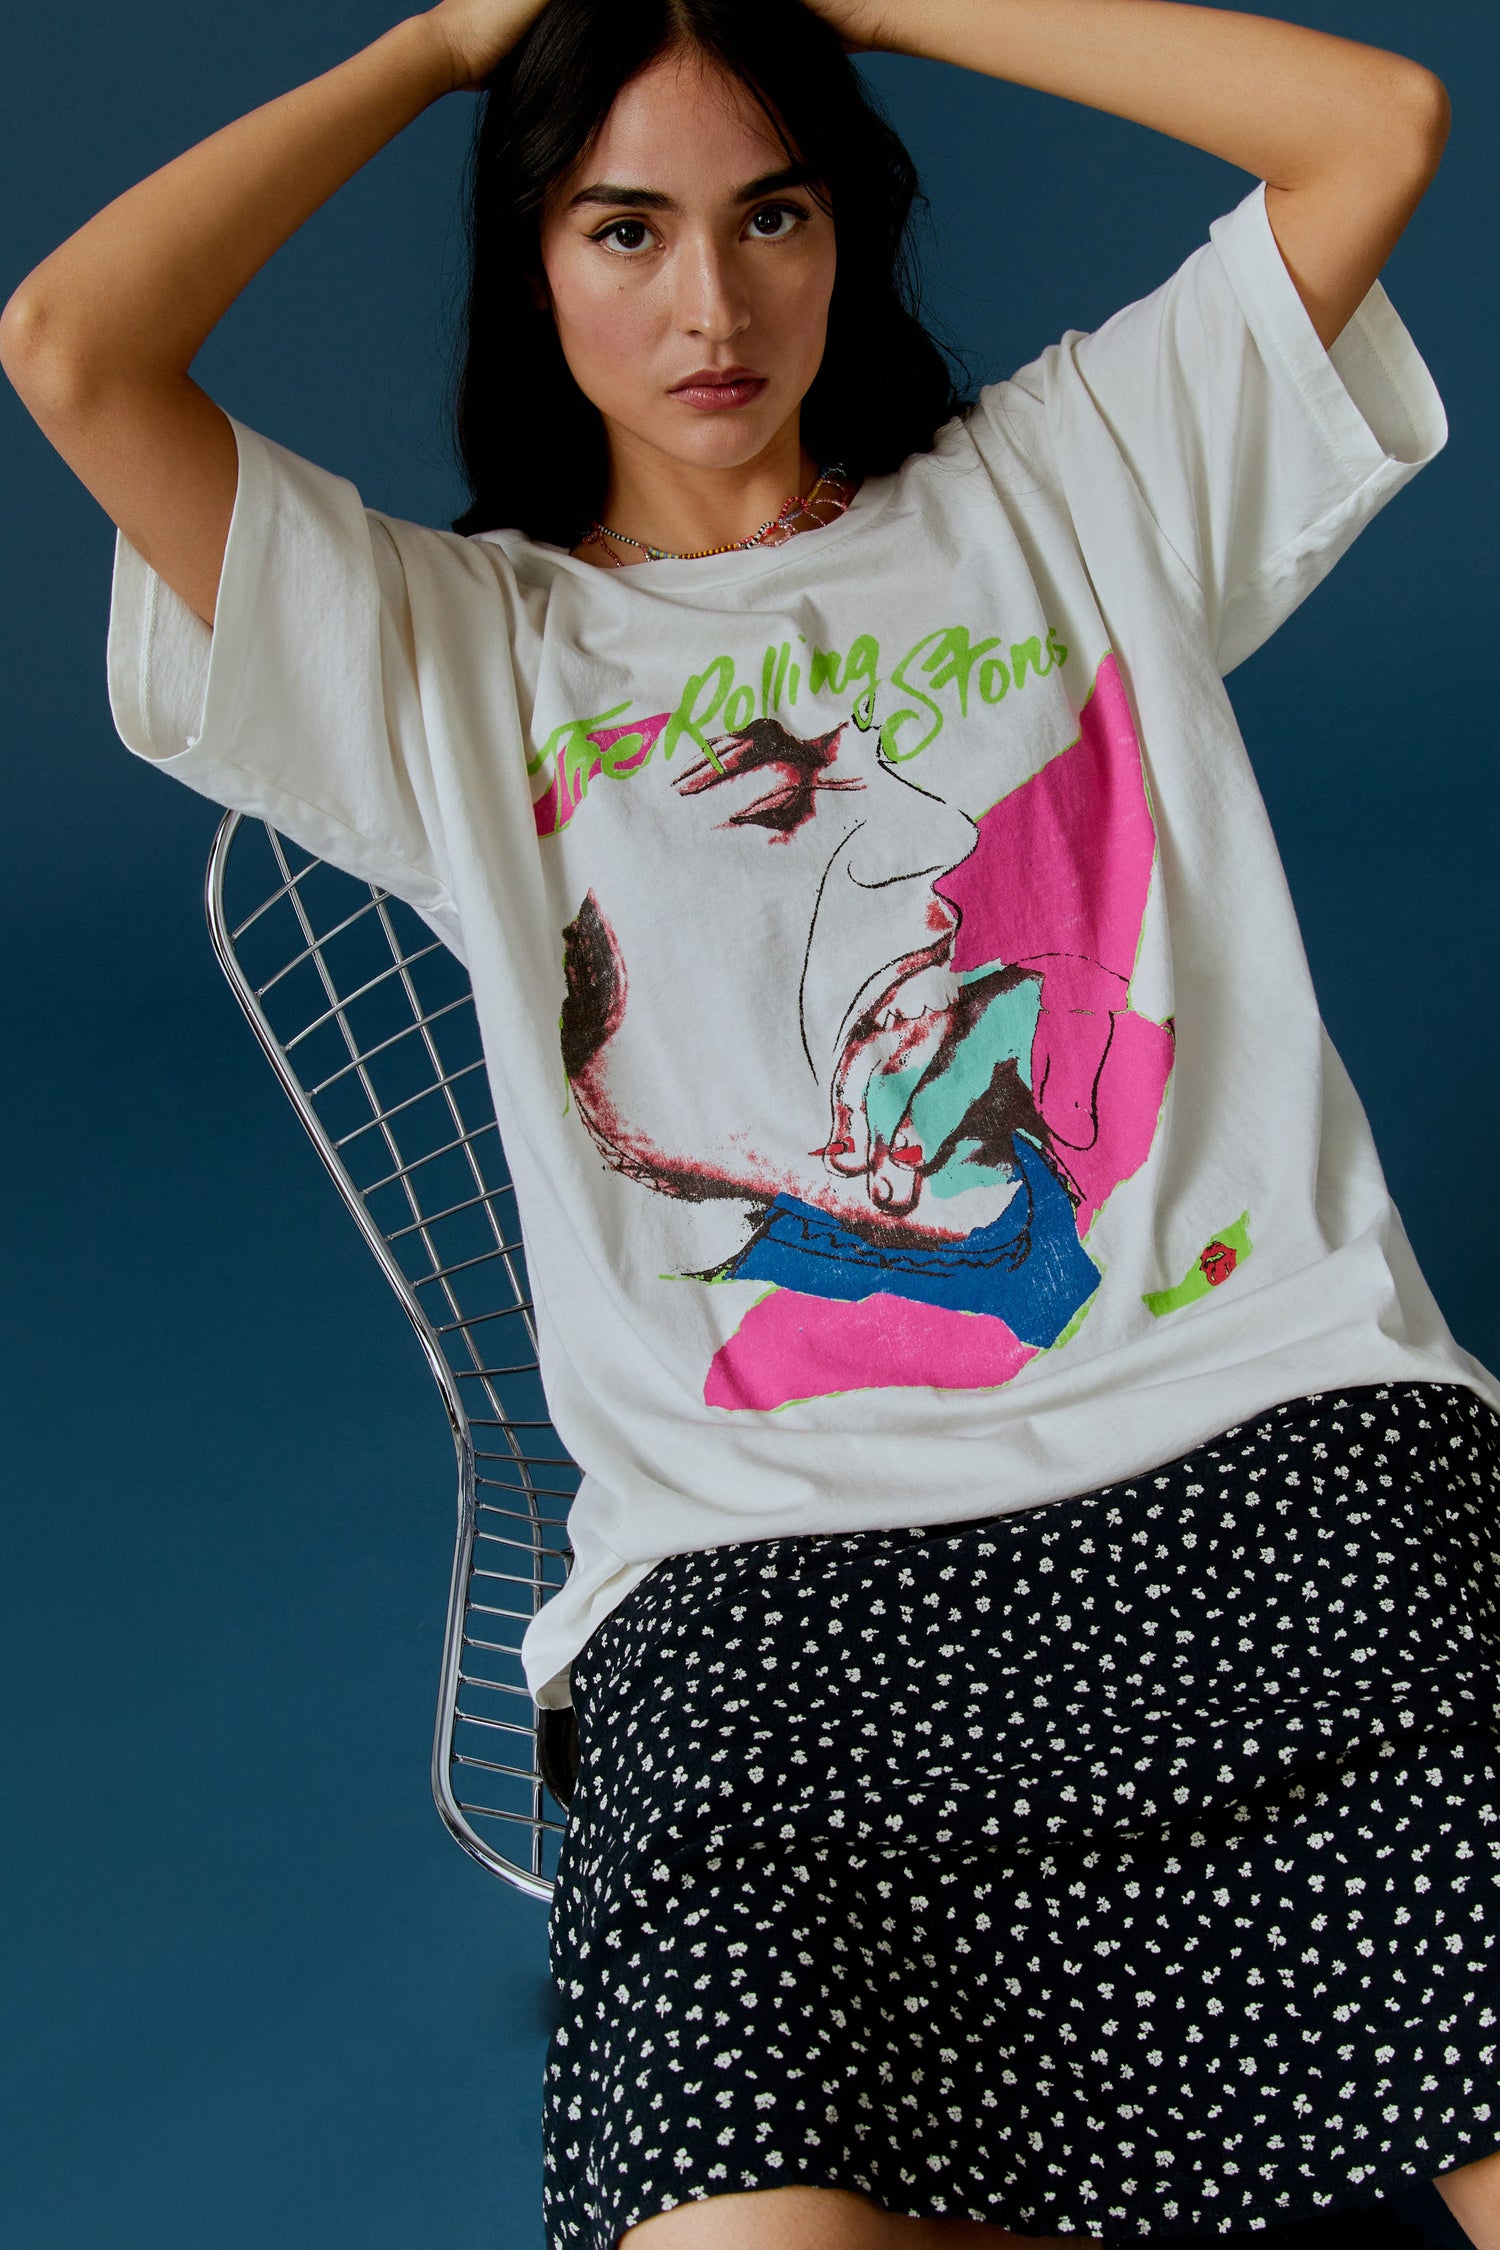 A dark-haired model featuring a white tee designed with the Rolling Stones album cover, Love You Live.